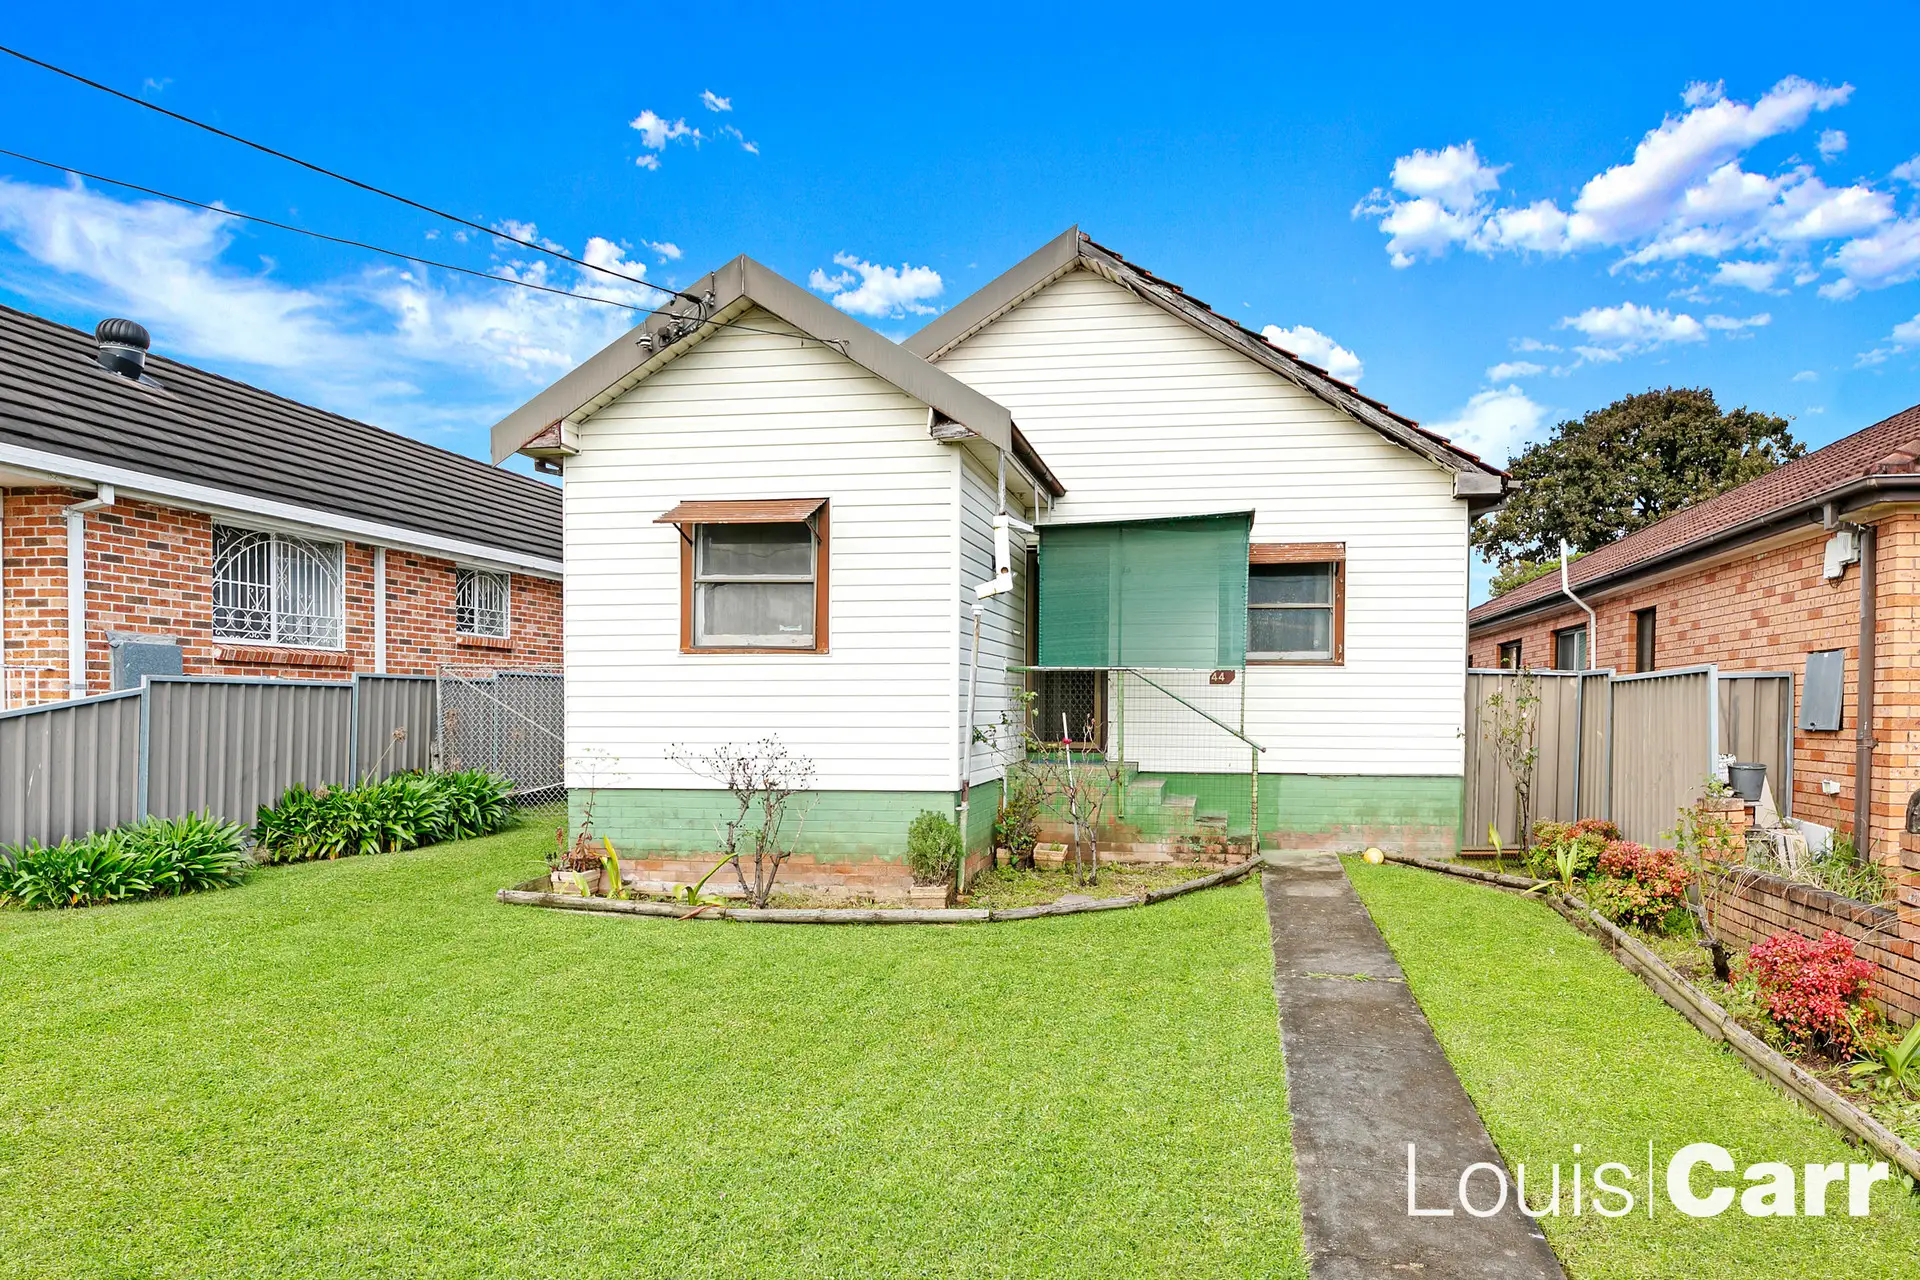 Photo #1: 44 McArthur Street, Guildford - Sold by Louis Carr Real Estate